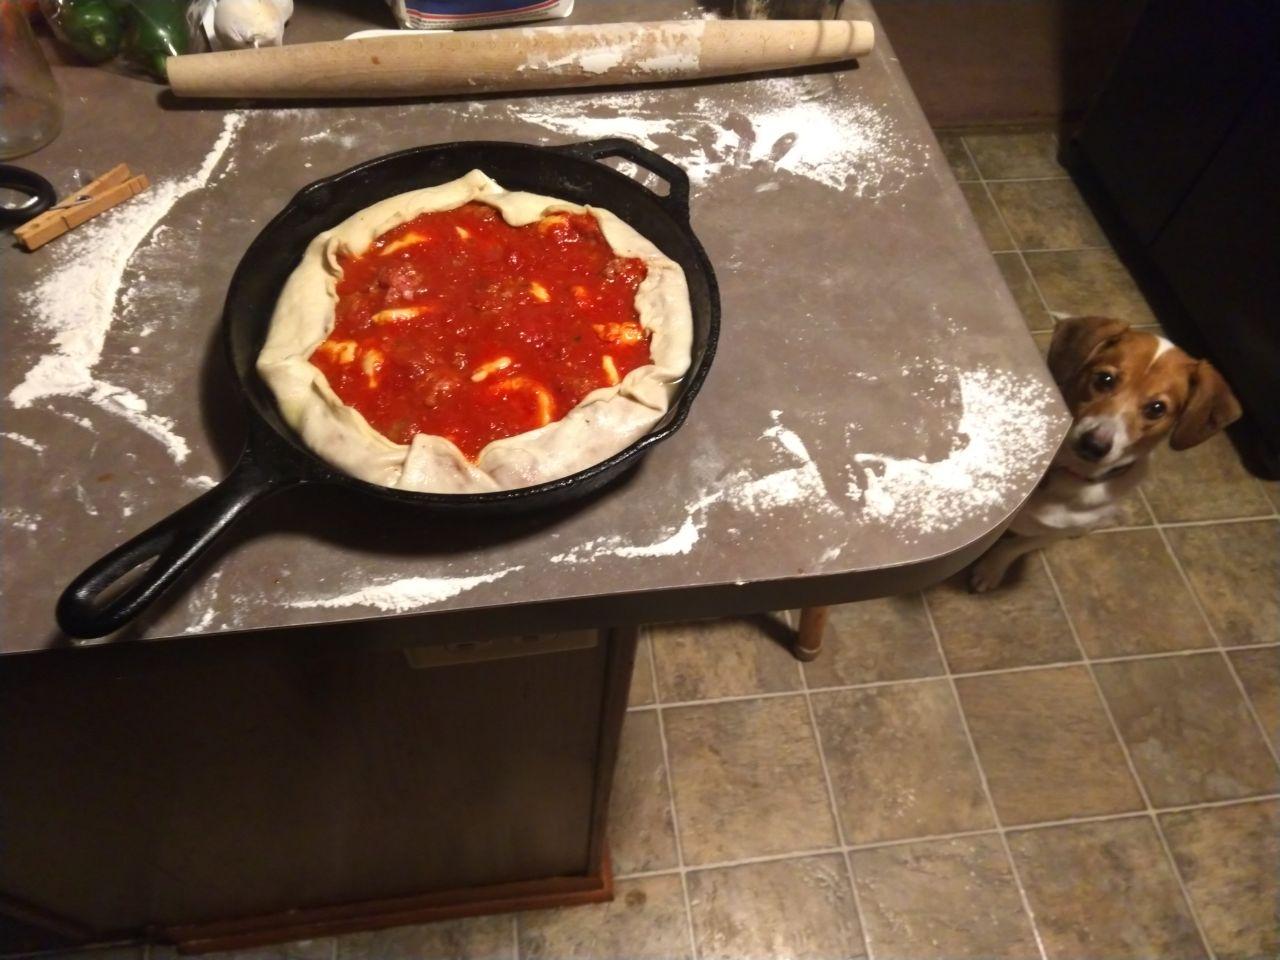 Deep dish pizza after filling with cheese, sausage, and sauce.